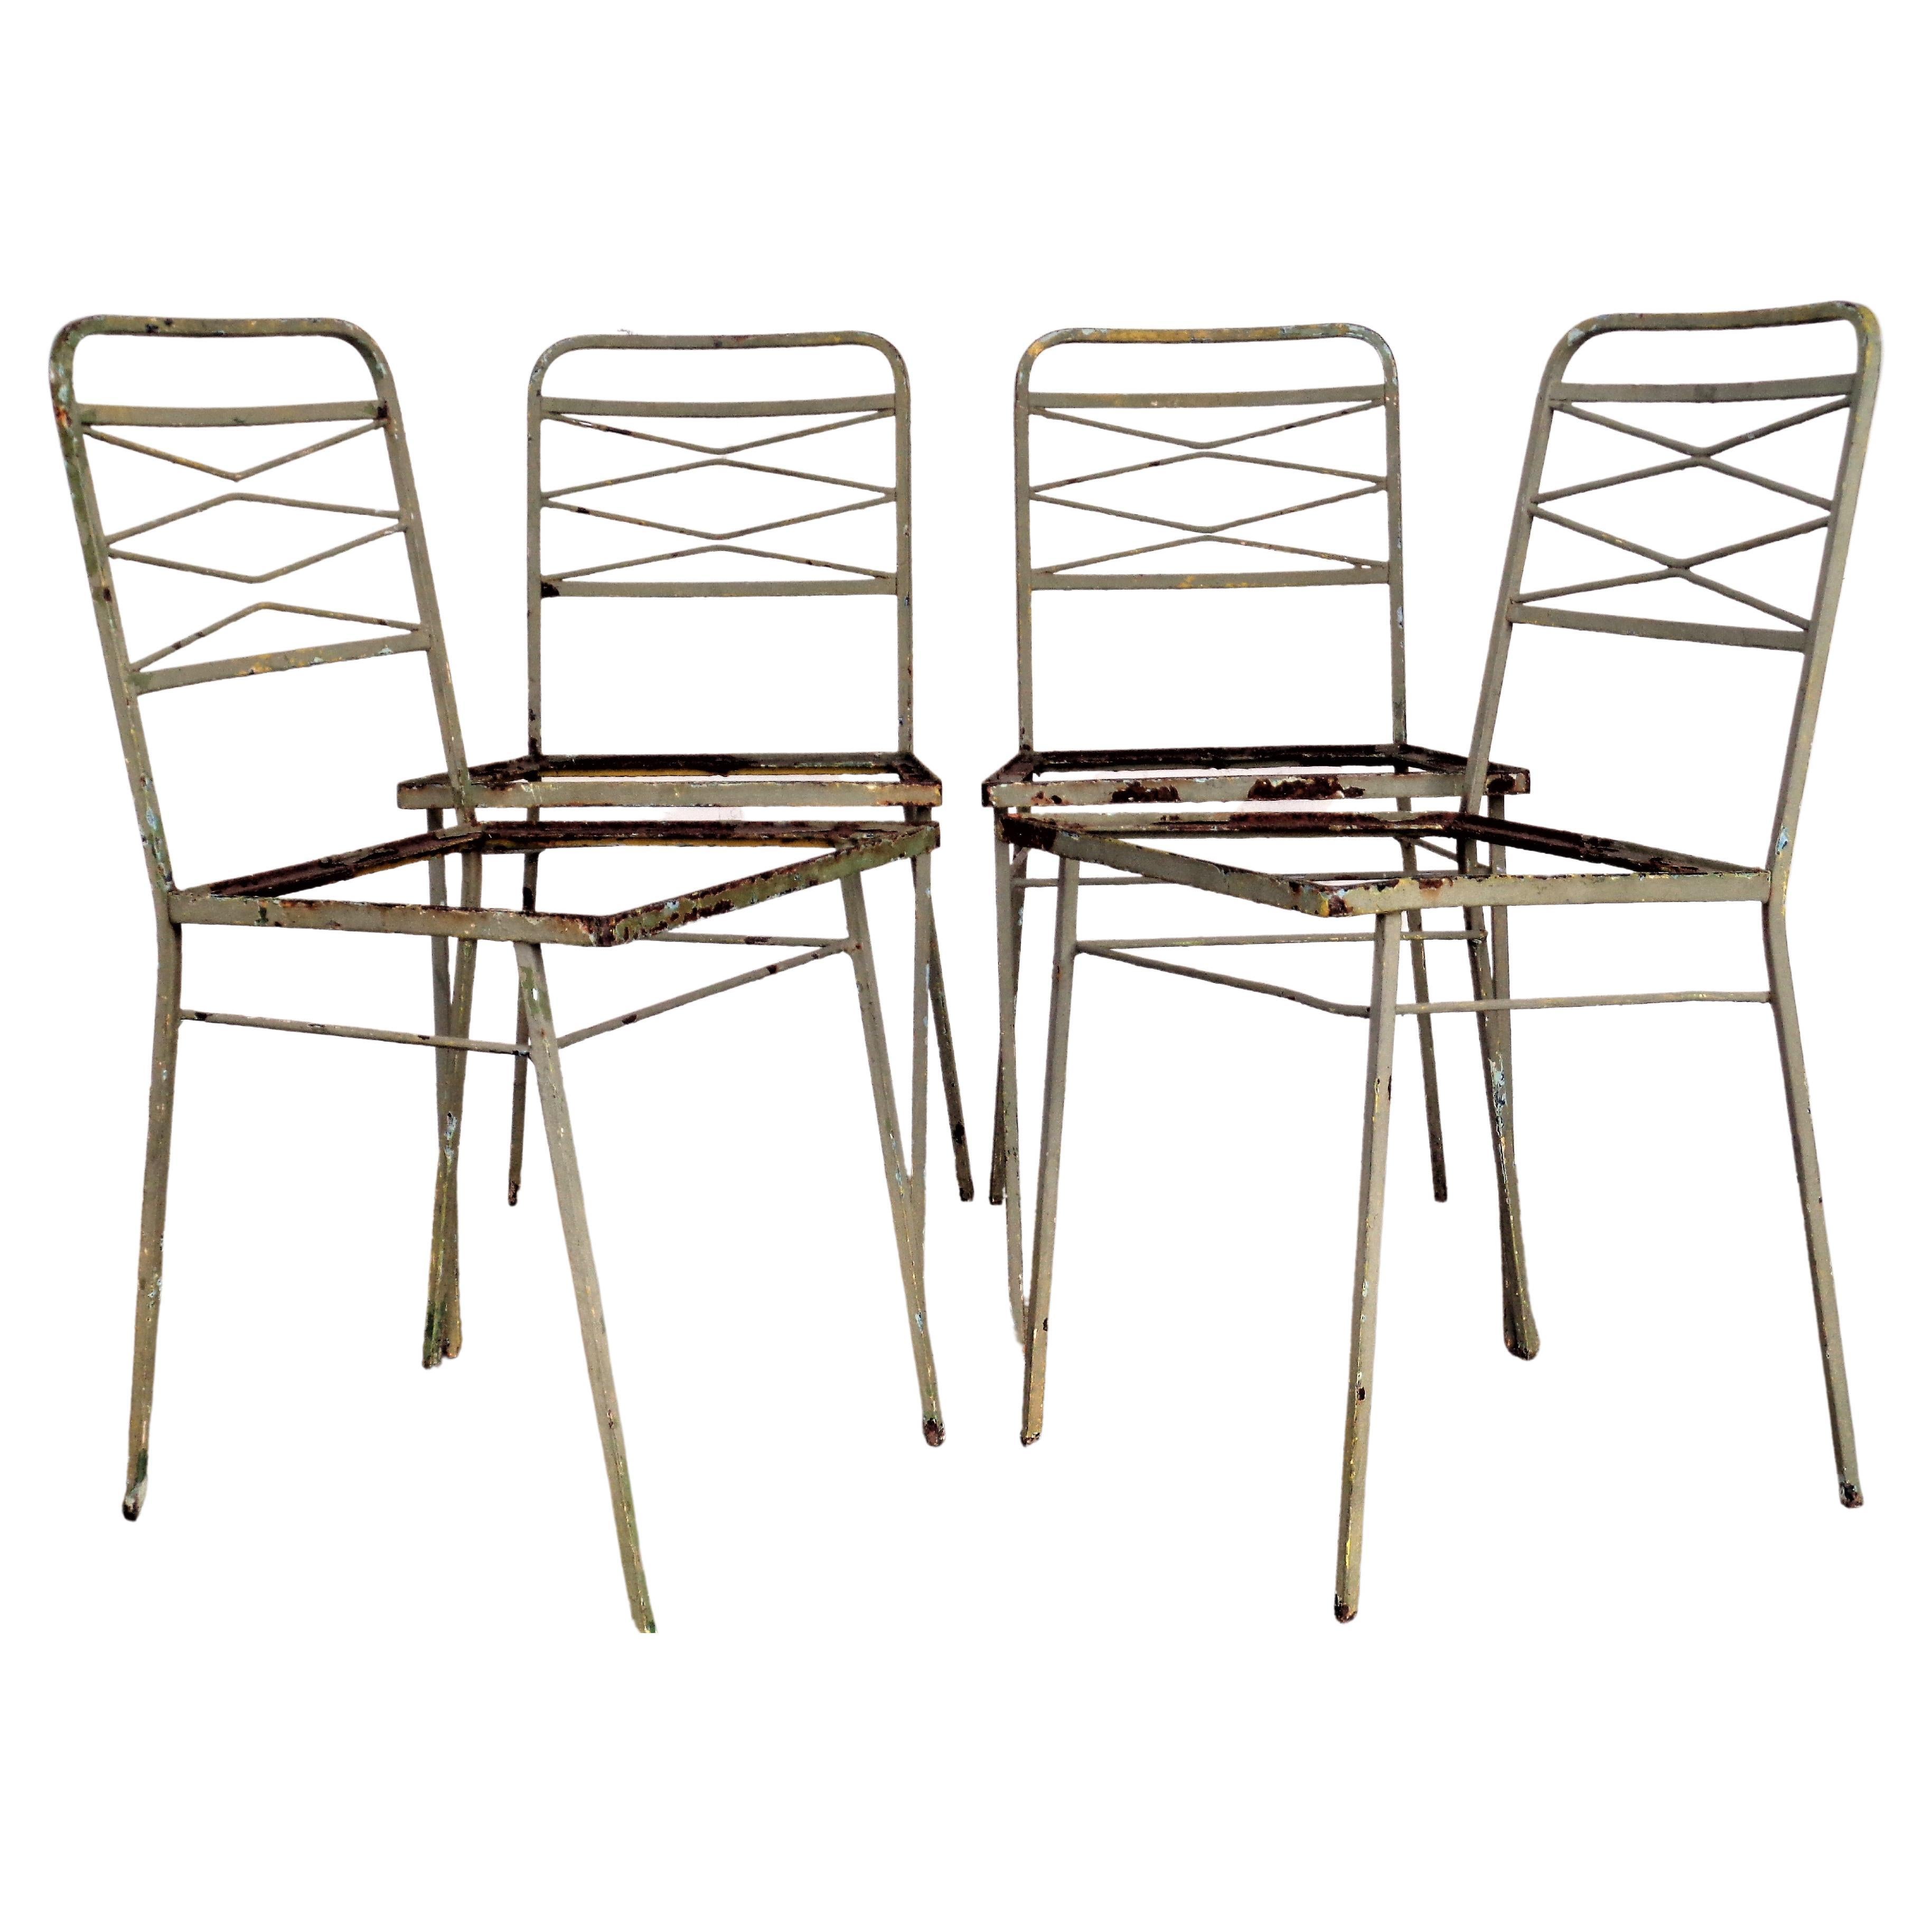   1940's Modernist Wrought Iron Chairs, Set of Four